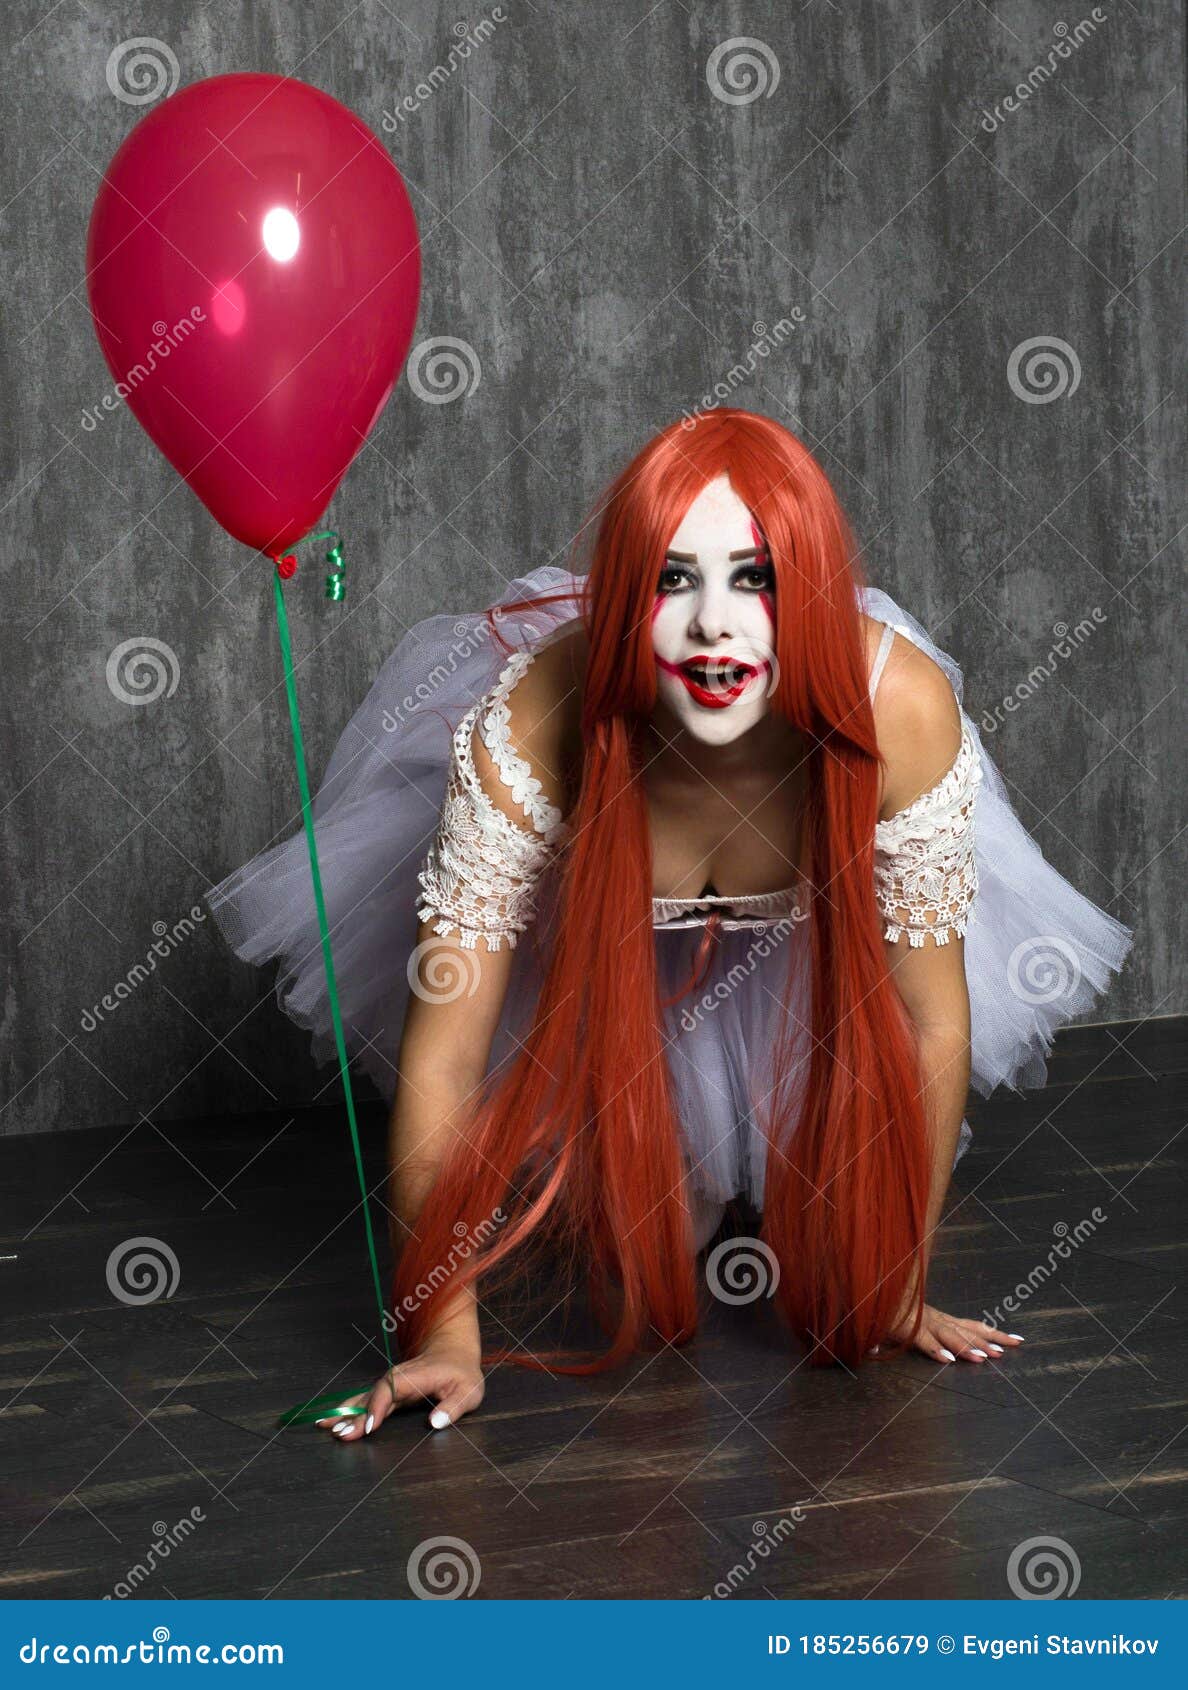 A Girl In A Clown Costume With Scary Makeup Stock Image Image Of Beautiful Monster